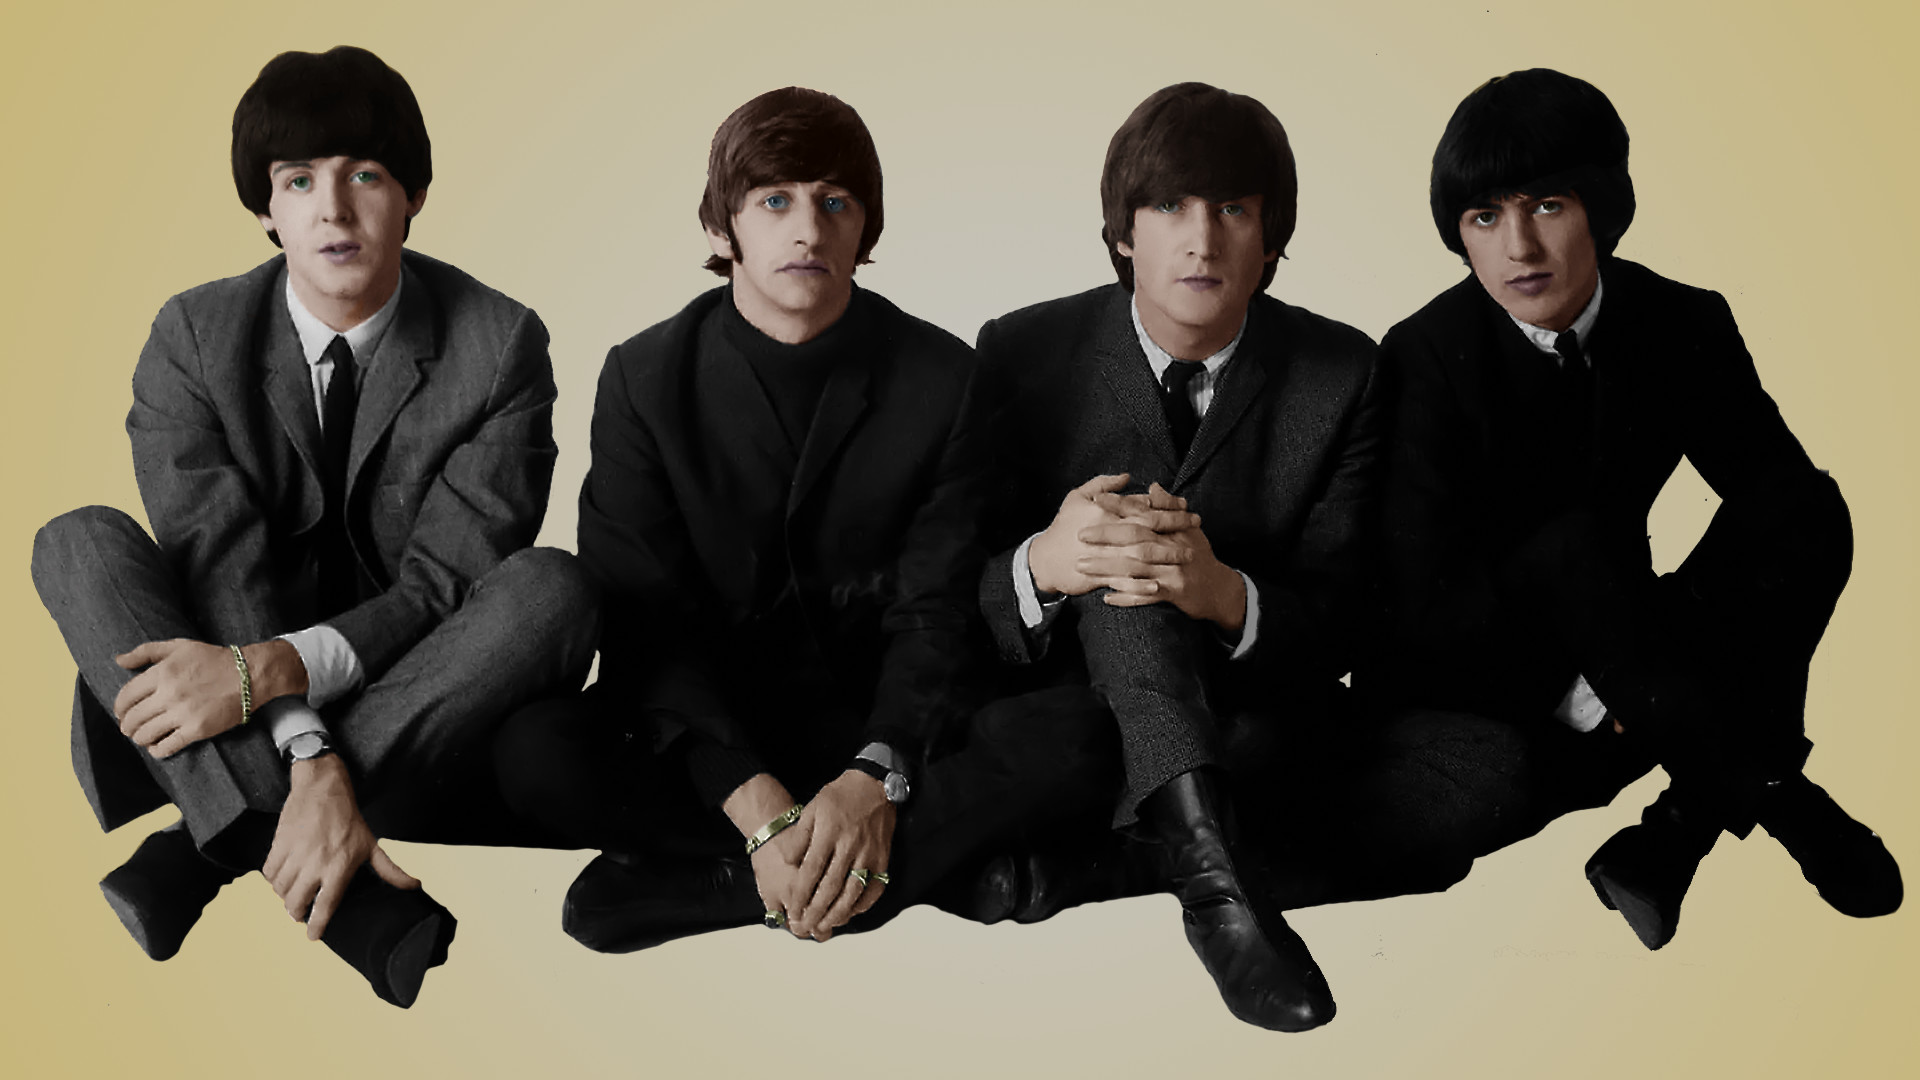 1920x1080 My-Favorite-Band-of-all-time-The-Beatles-